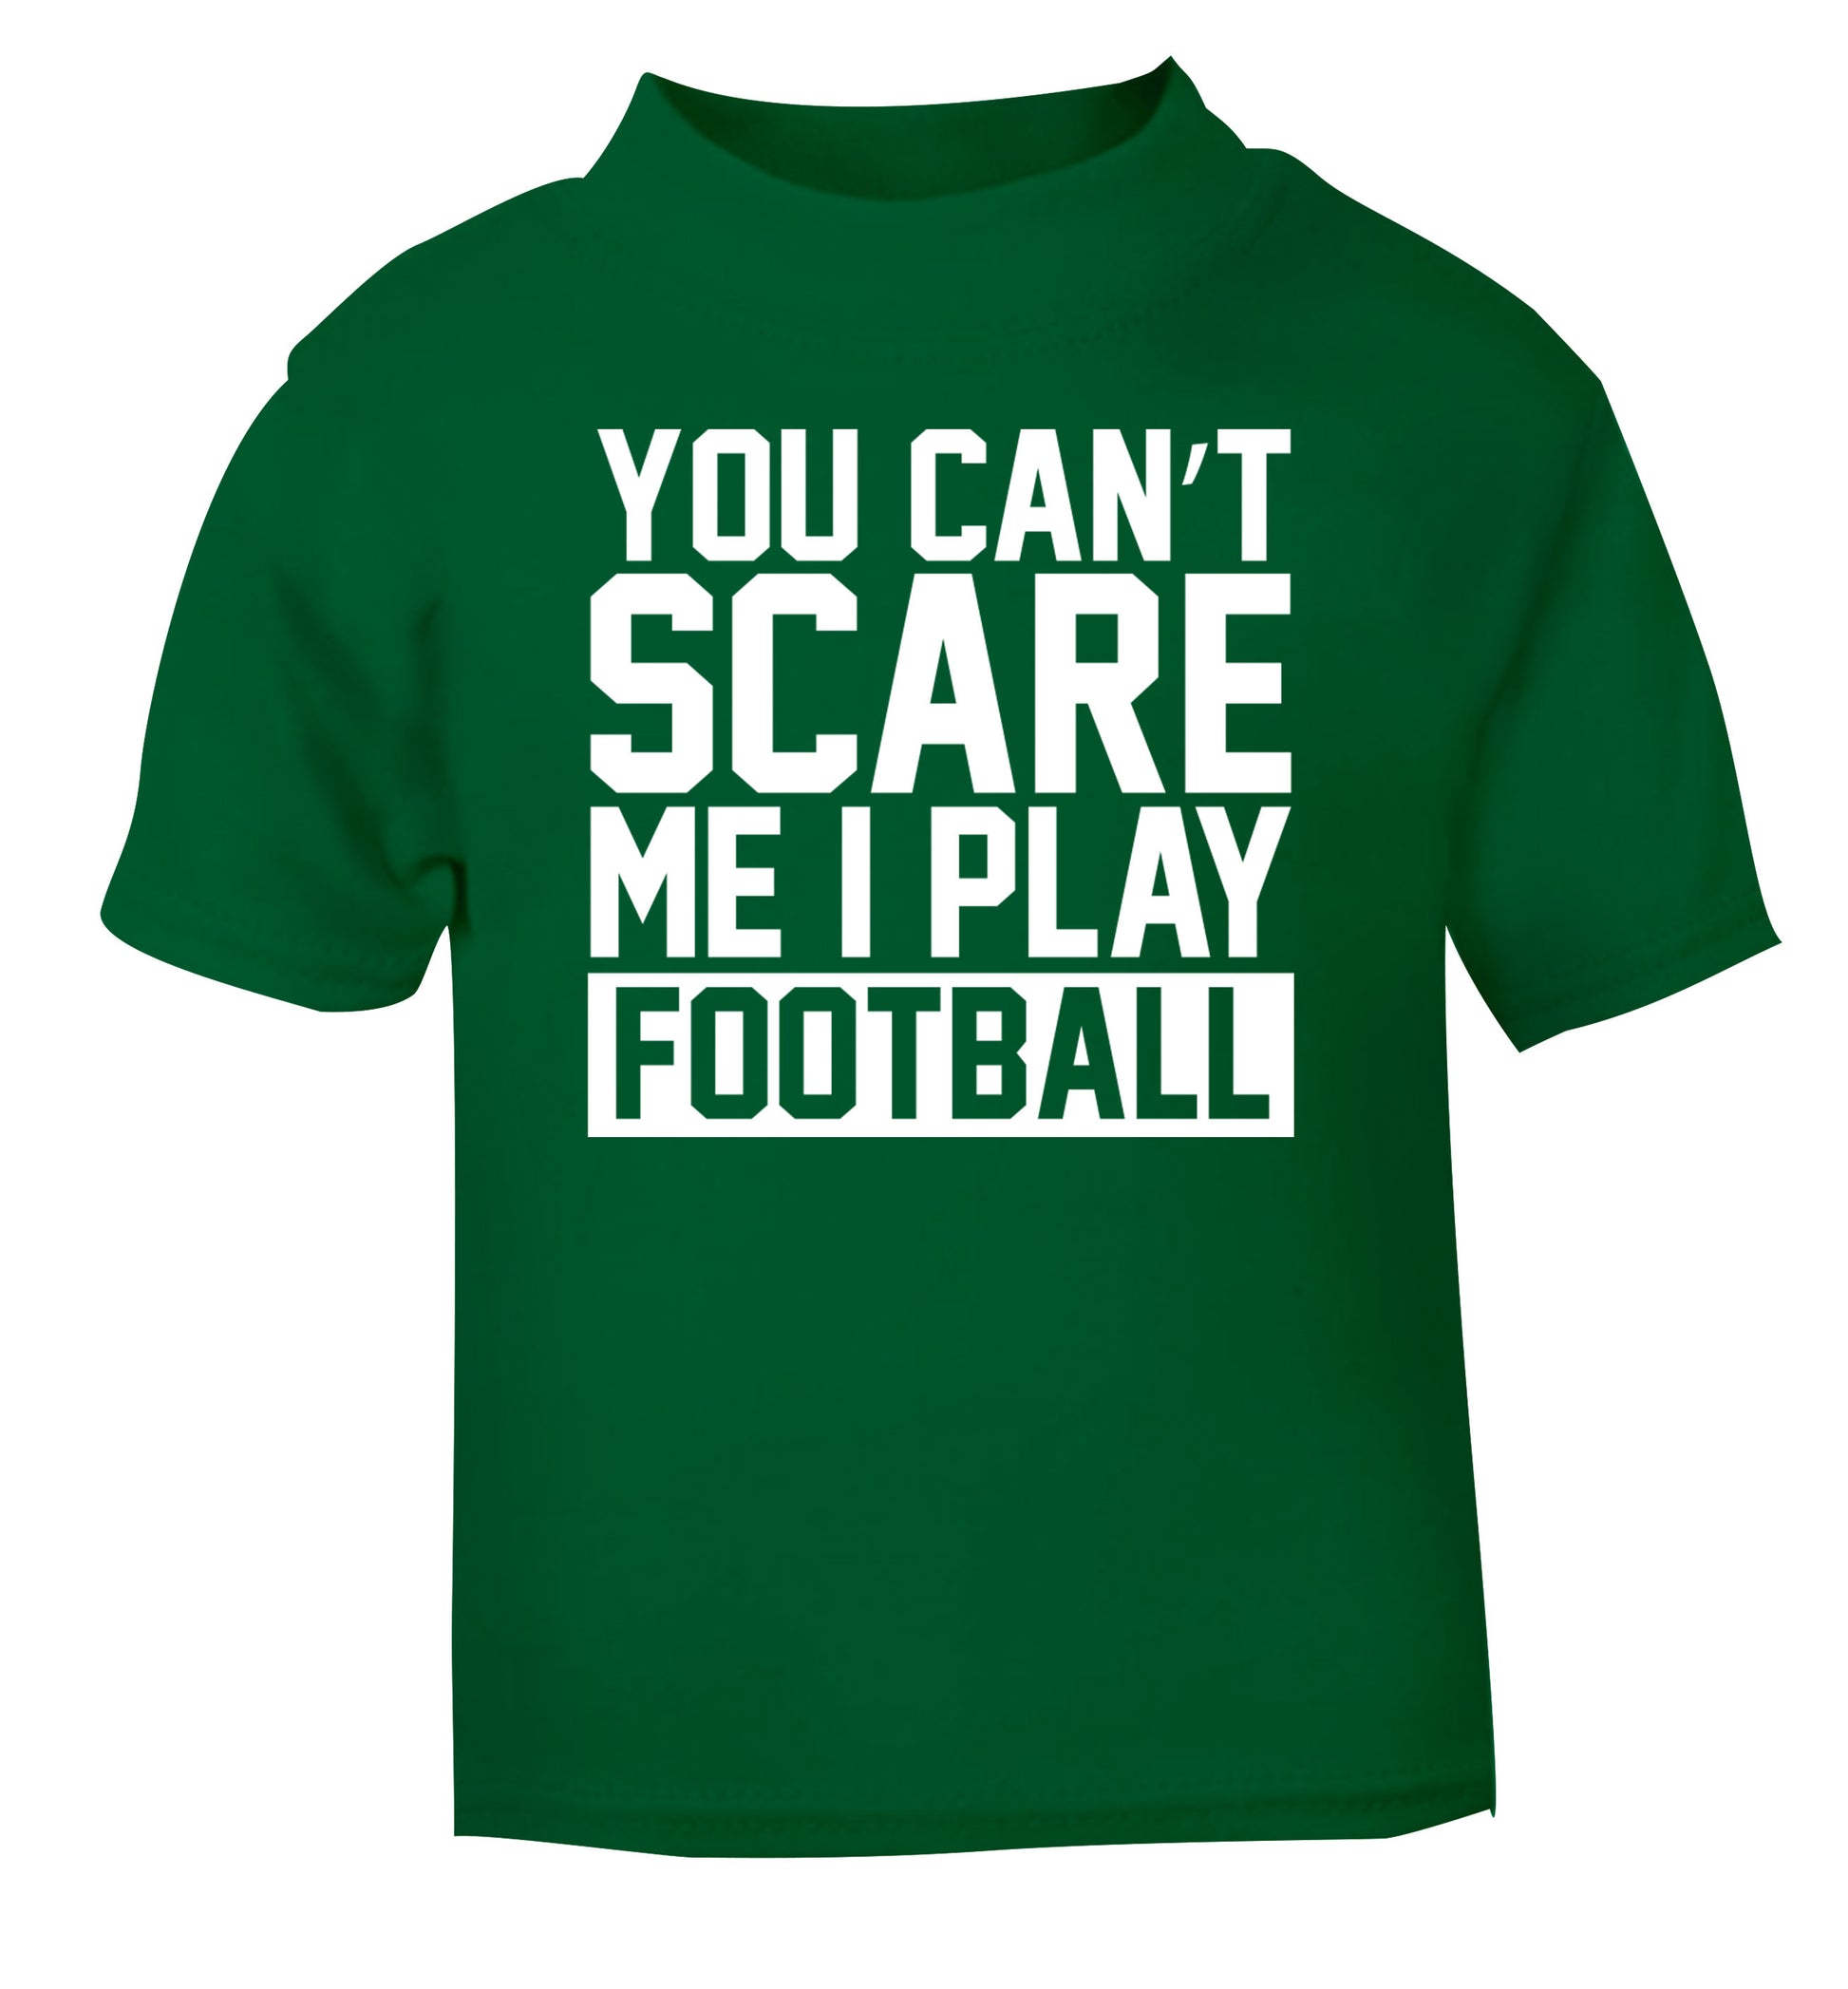 You can't scare me I play football green Baby Toddler Tshirt 2 Years